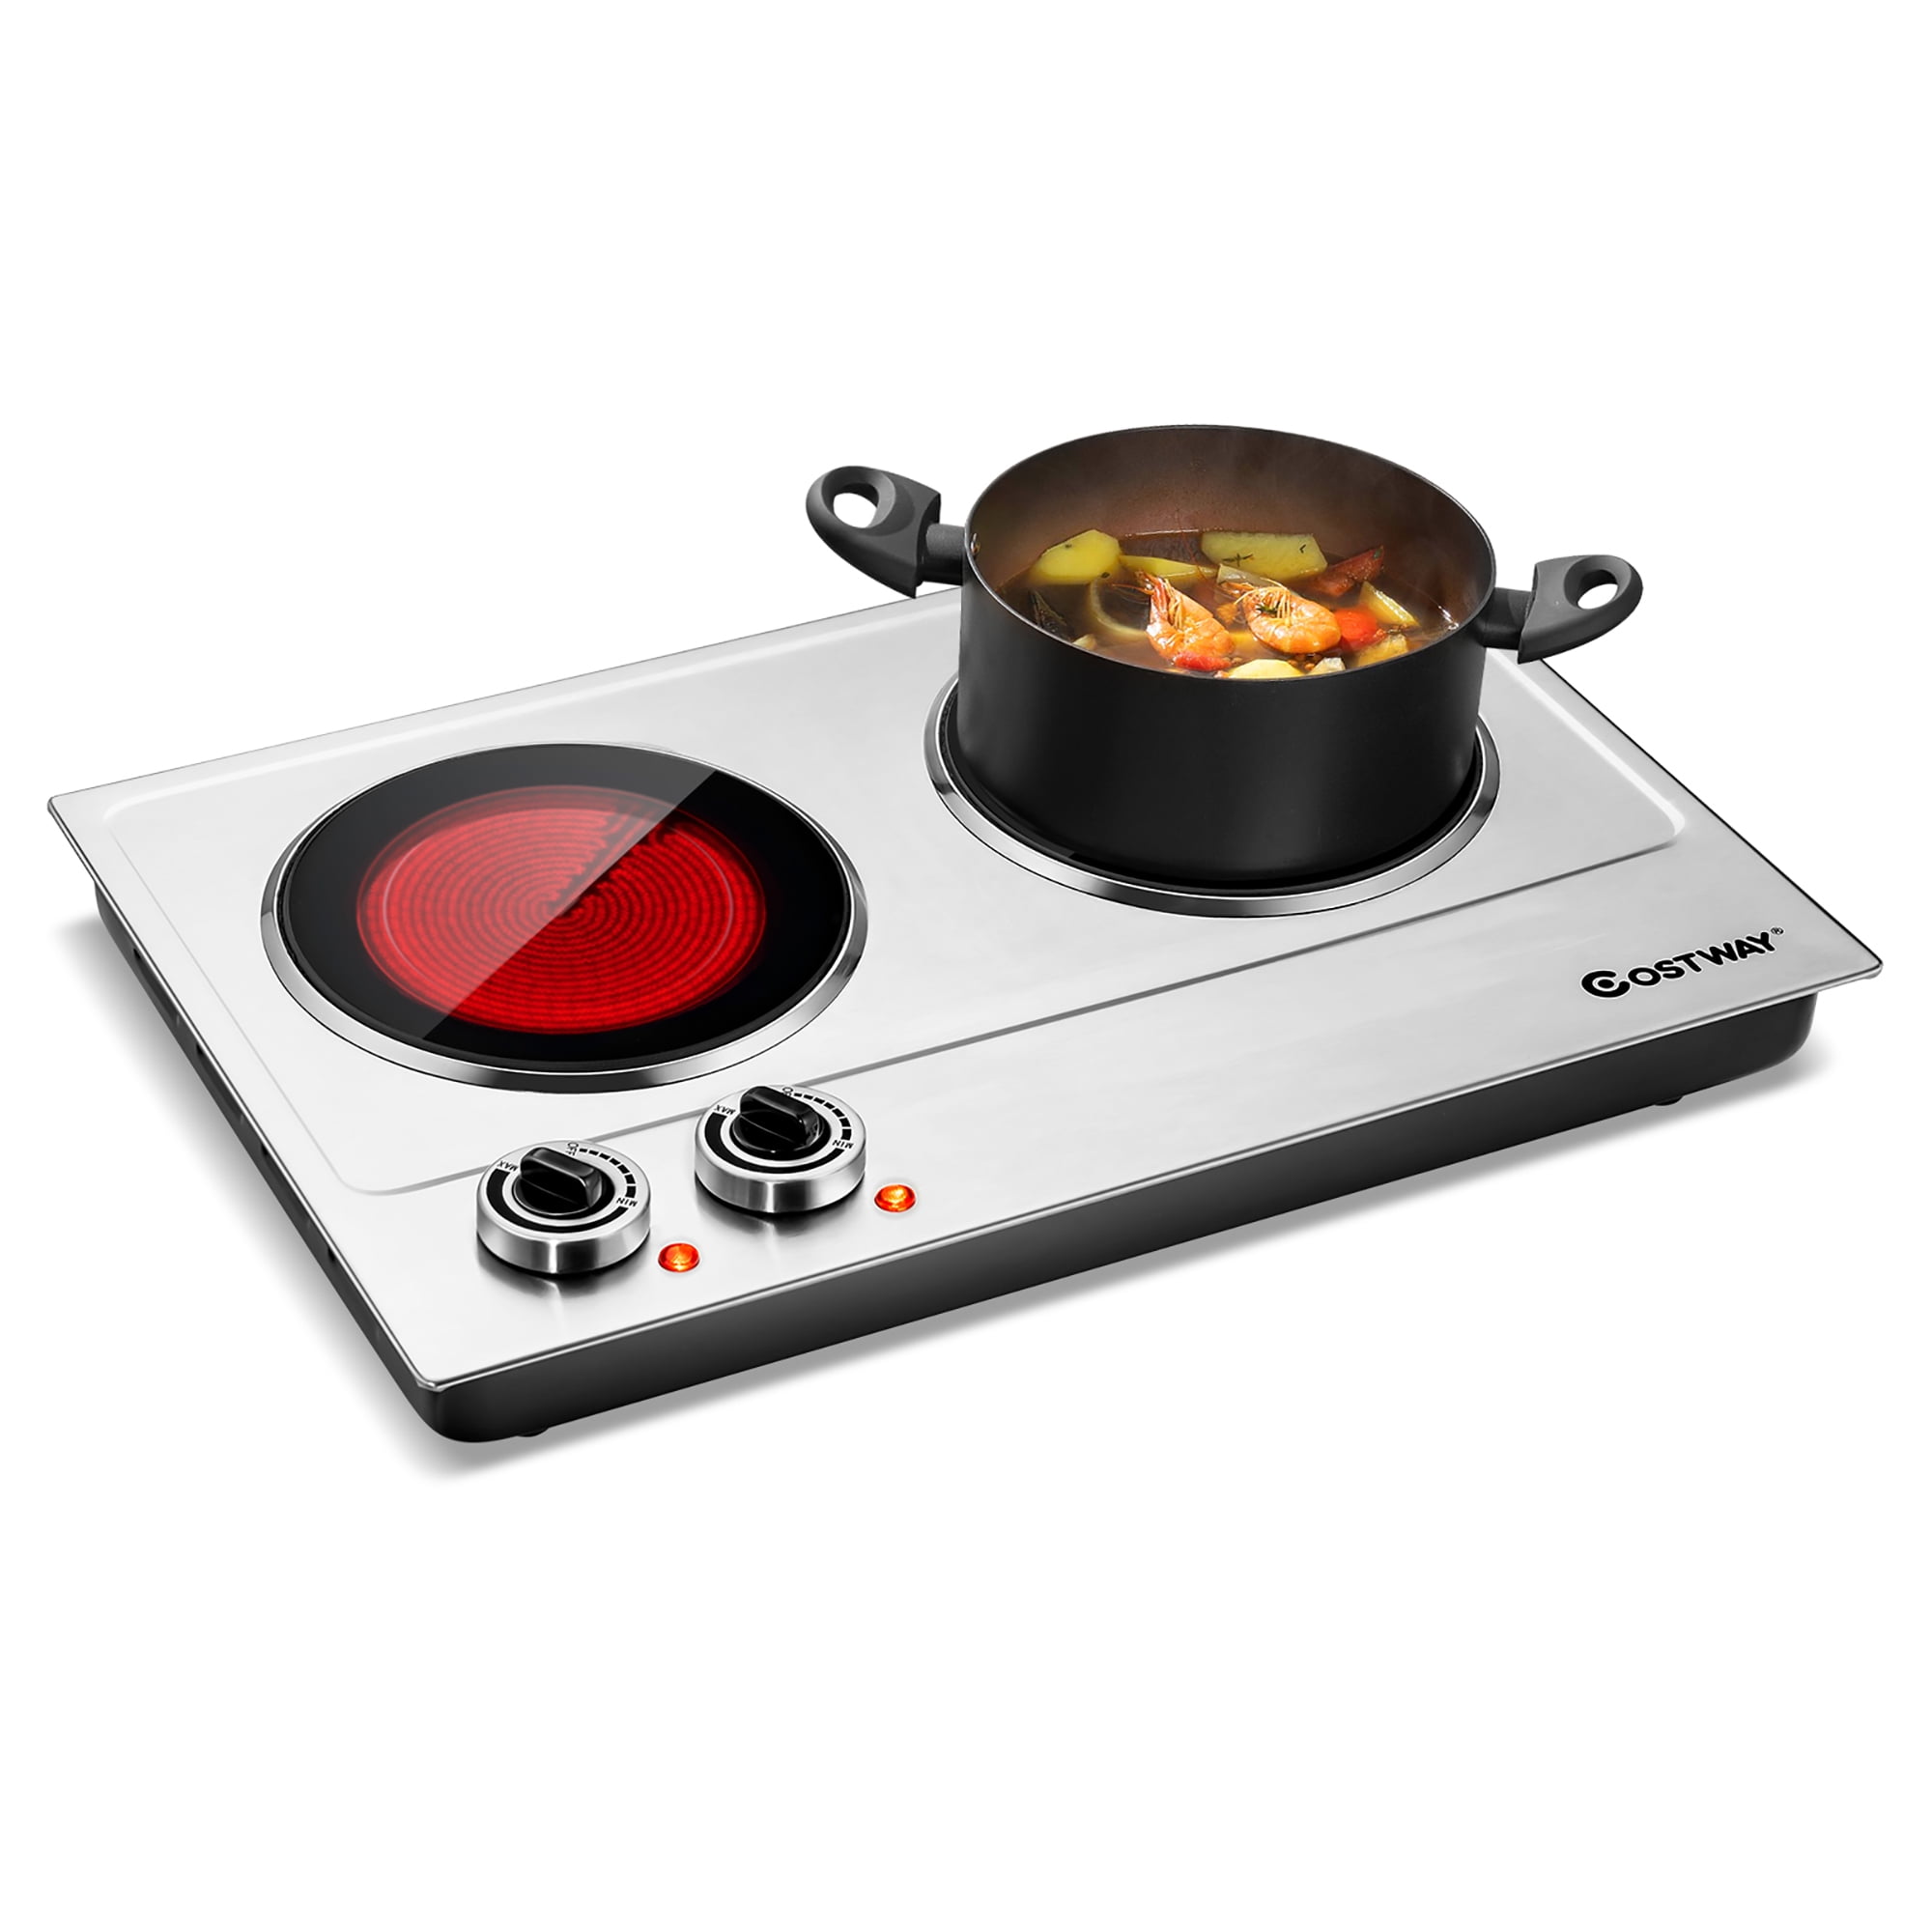 1pc The Best Commercial Double Hot Plate For Cooking Electric Stove 2  Burners Stainless Steel Two Hotplates 220-240v - Hot Plates - AliExpress